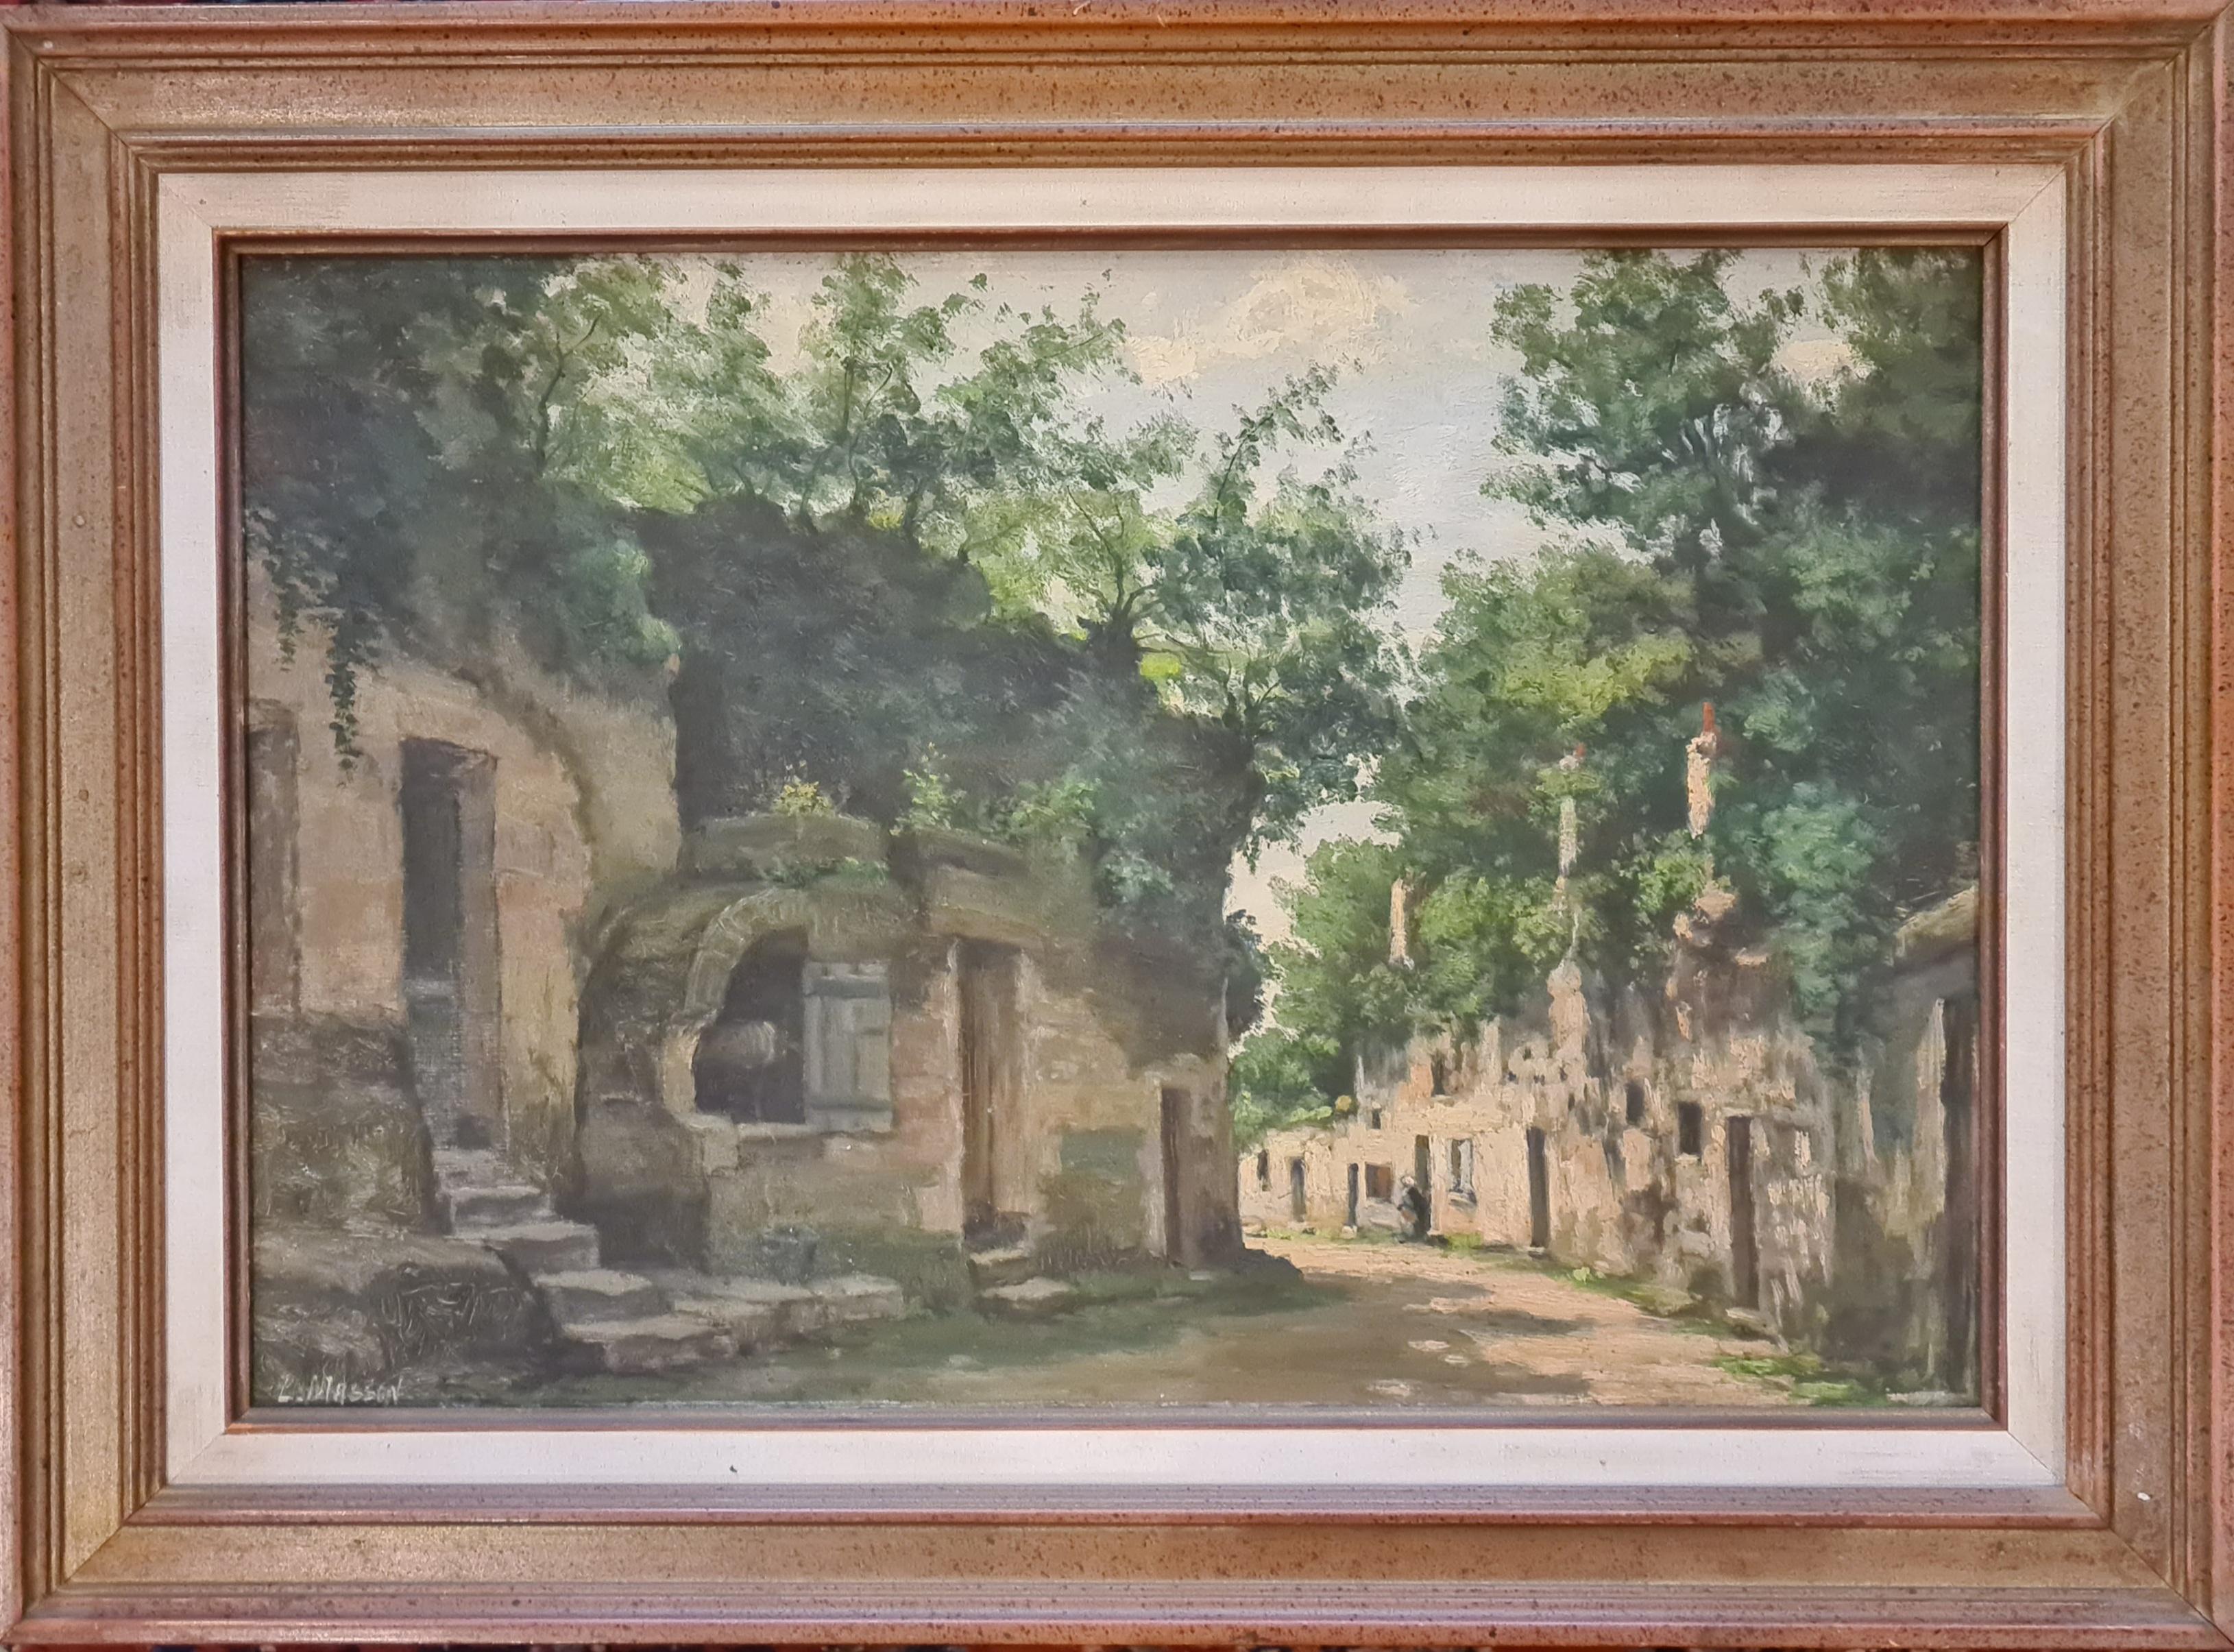 Le Puits, The Water Well Amidst Romantic Ruins - Painting by L. Masson